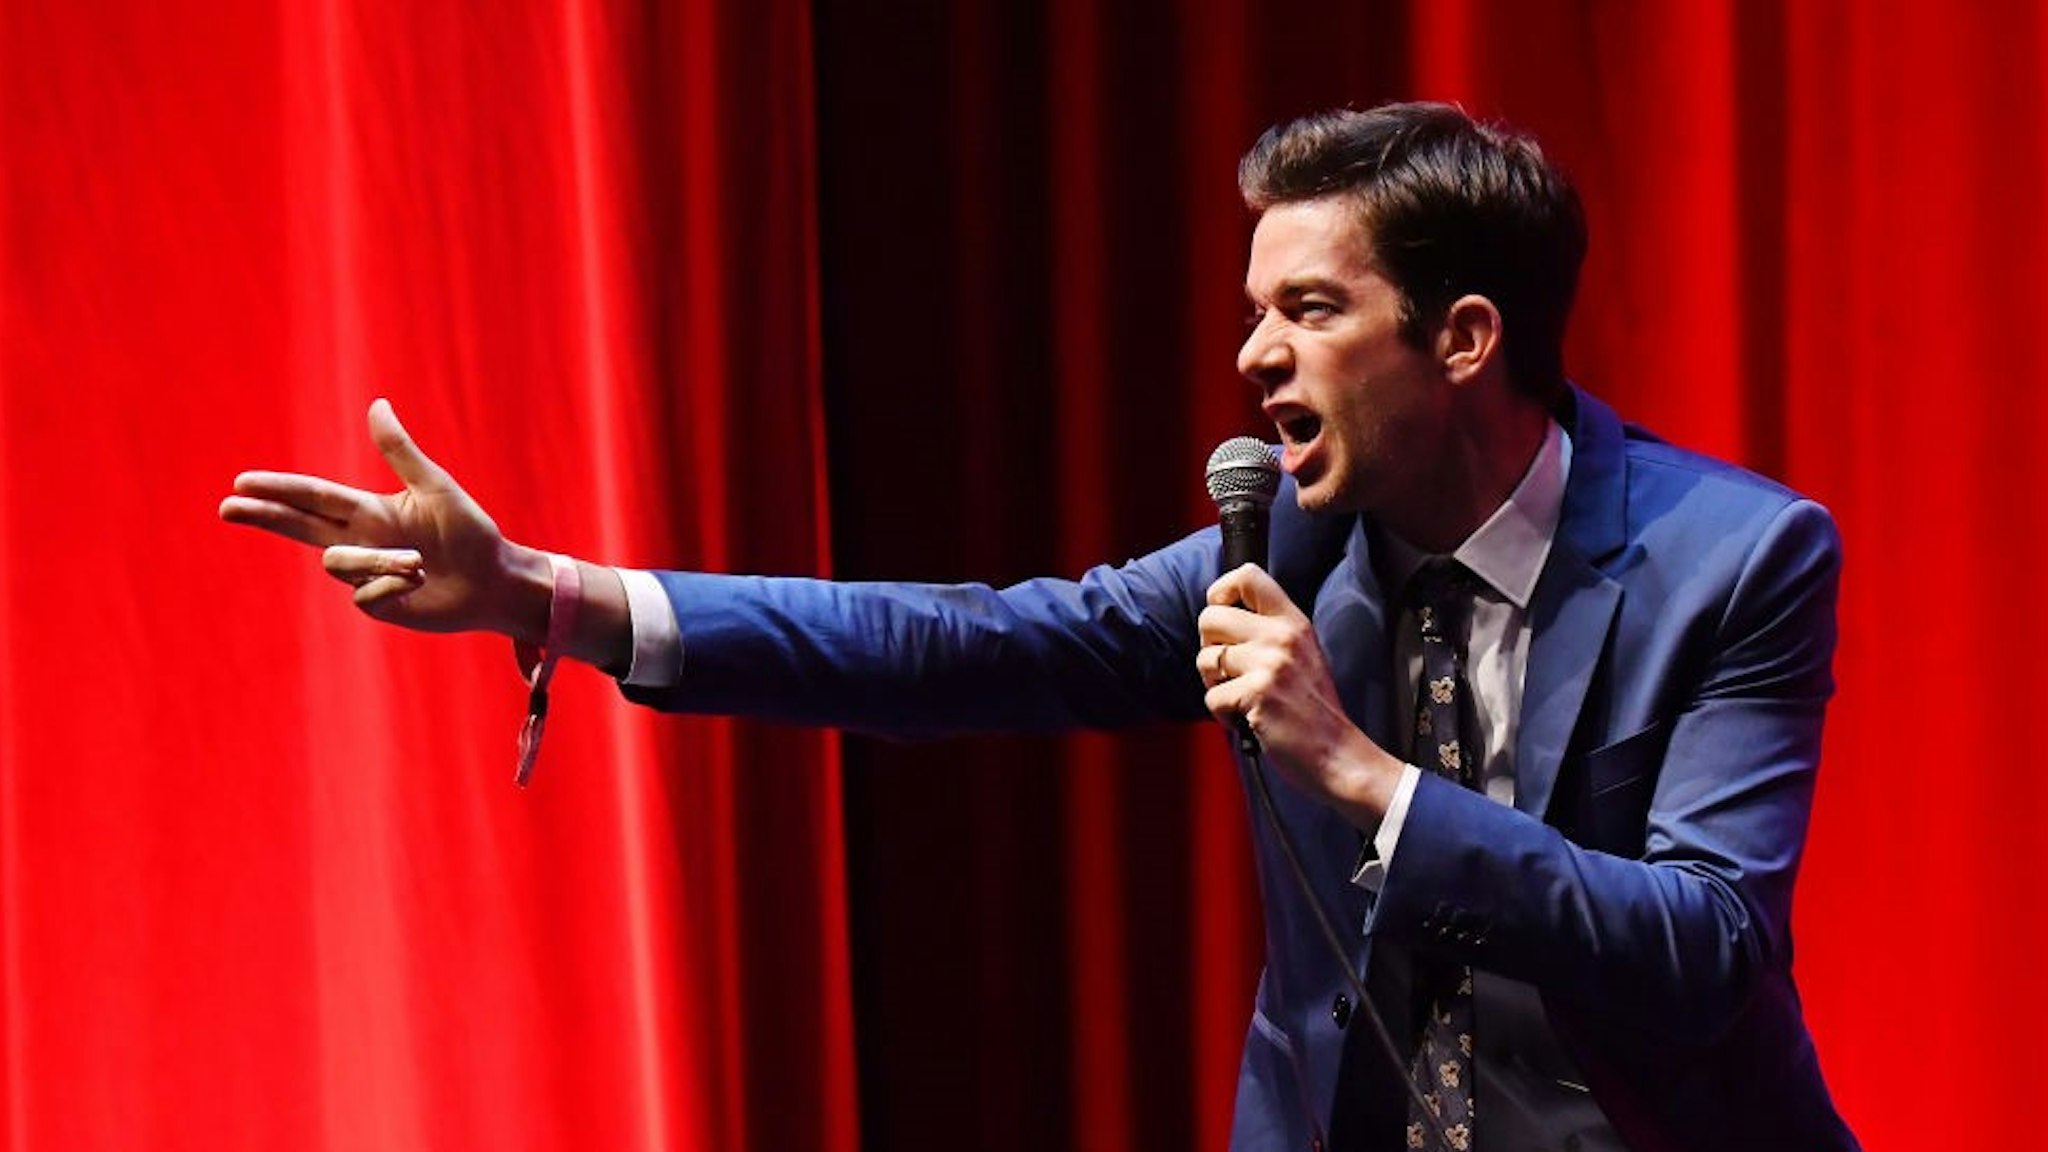 SAN FRANCISCO, CALIFORNIA - JUNE 22: John Mulaney performs onstage at the 2019 Clusterfest on June 22, 2019 in San Francisco, California. (Photo by